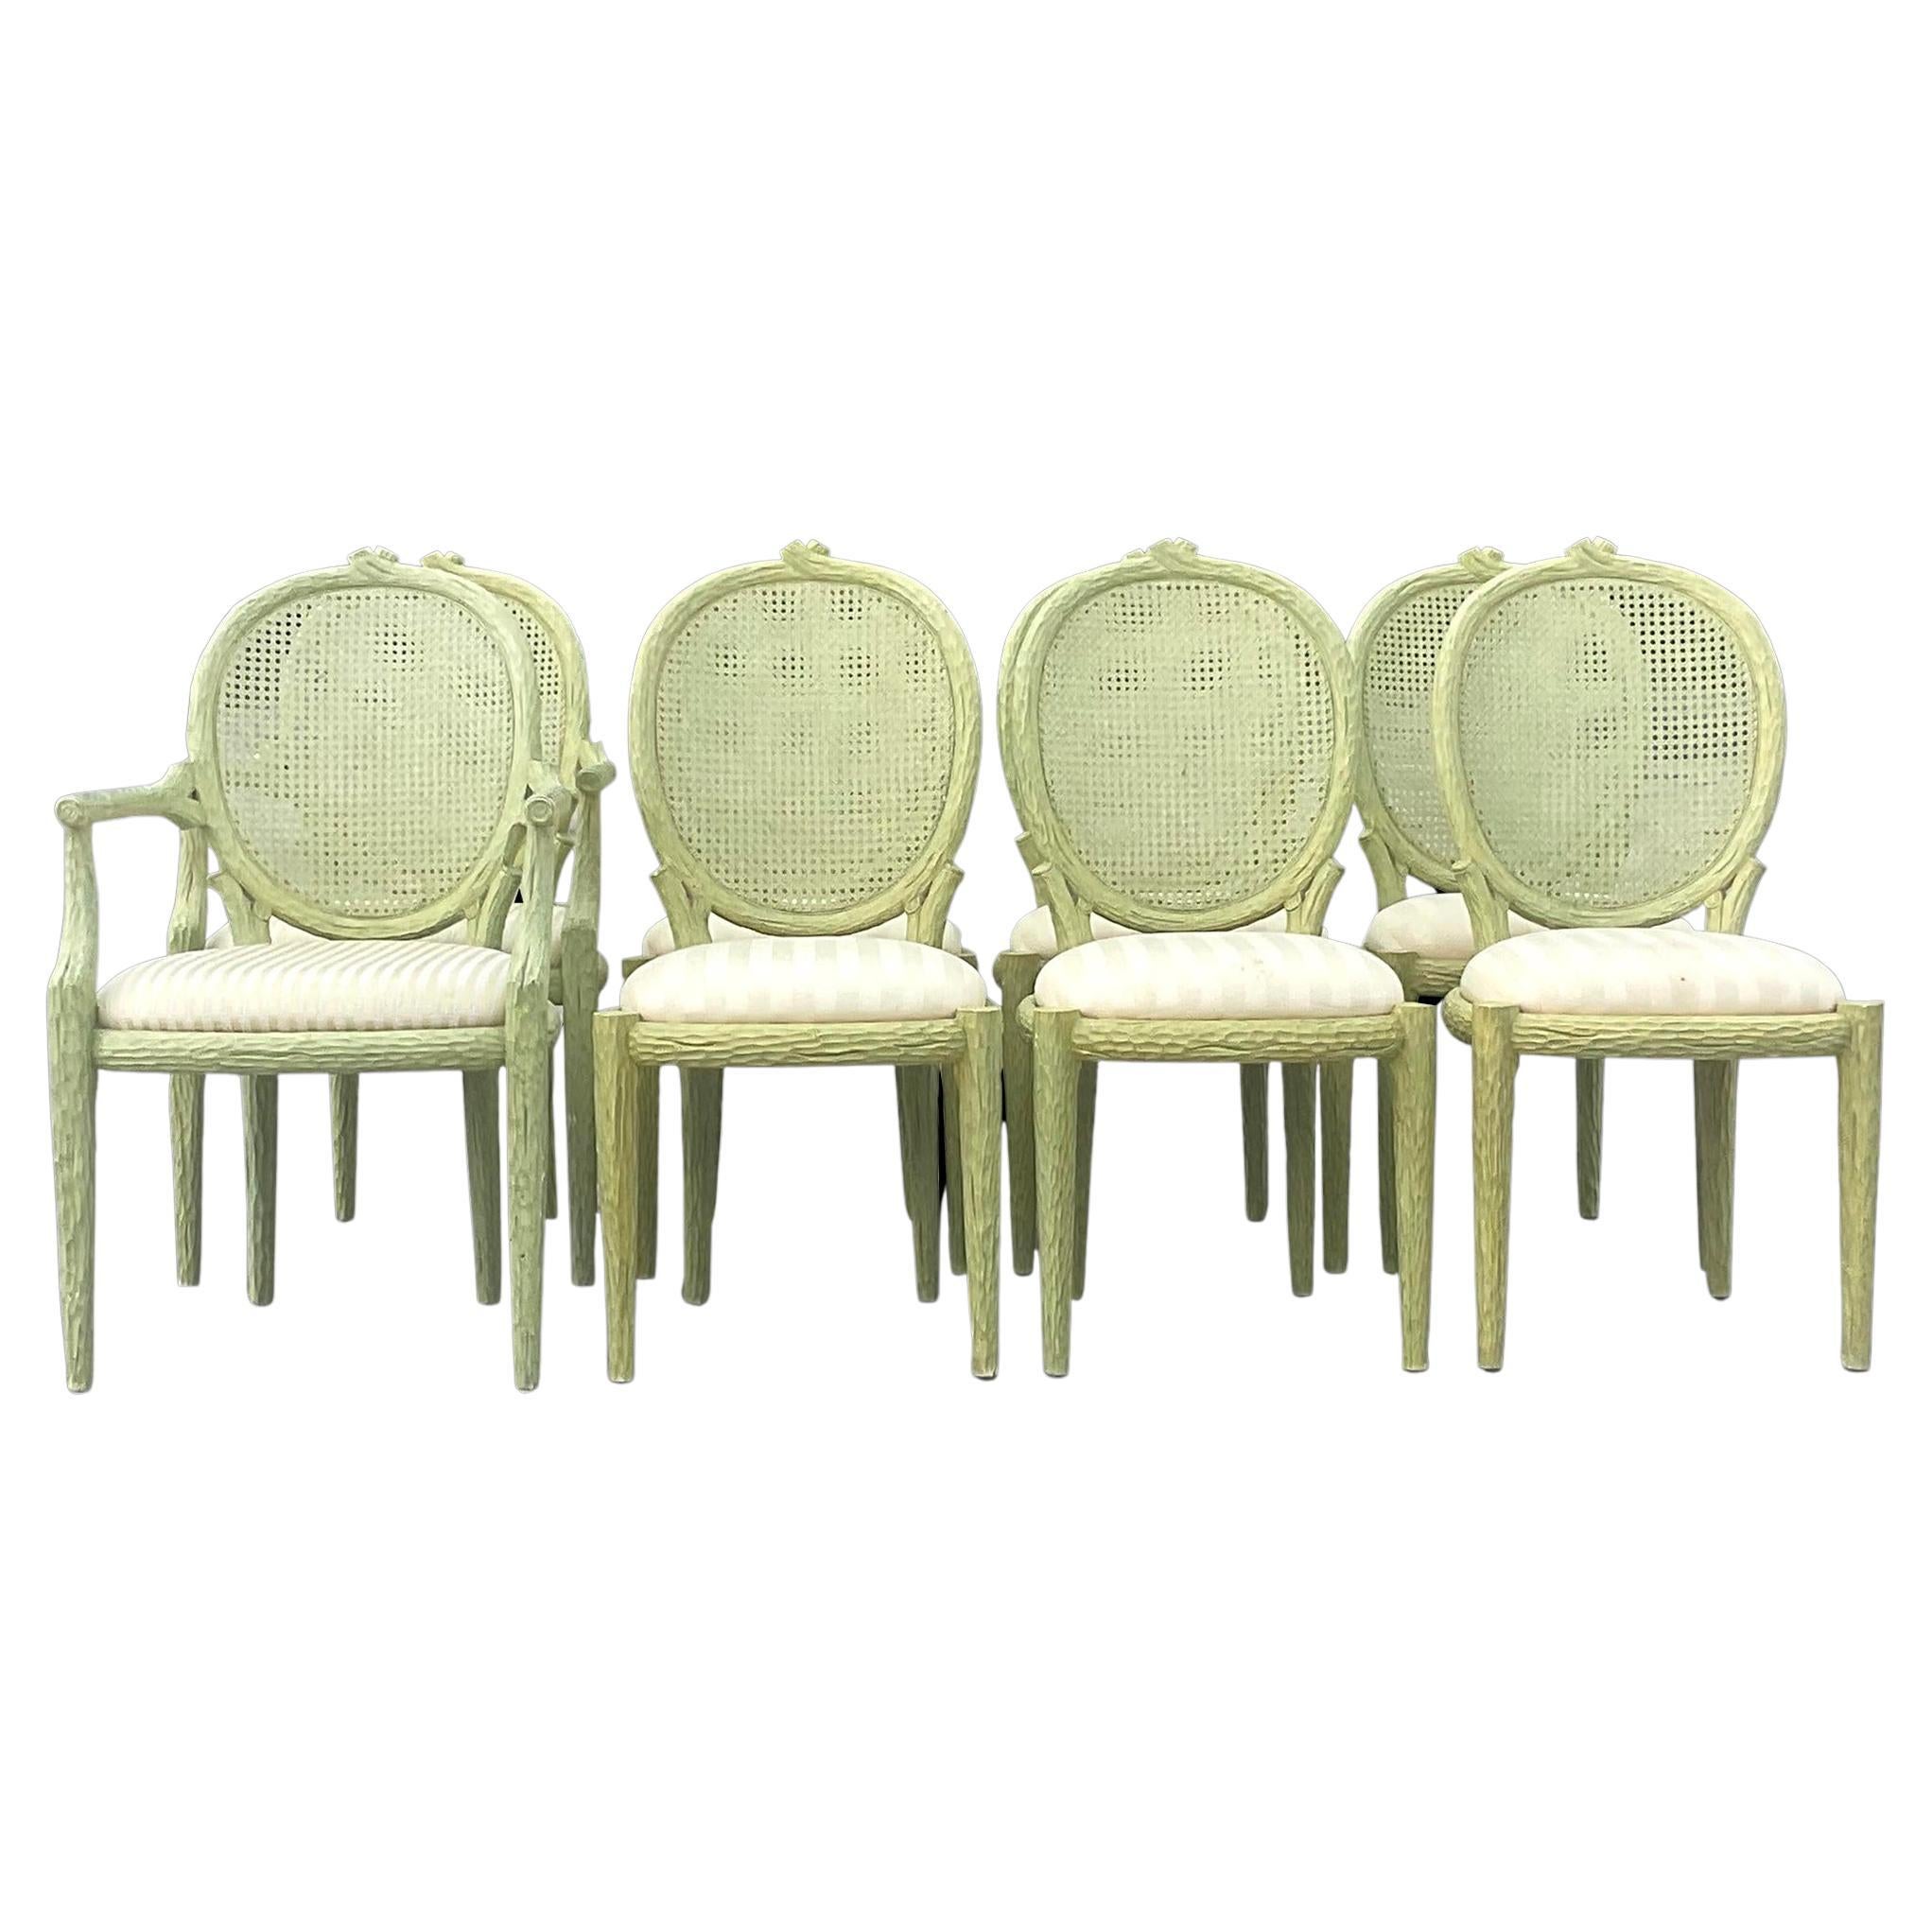 Vintage Regency Faux Bois and Cane Dining Chairs - Set of 8